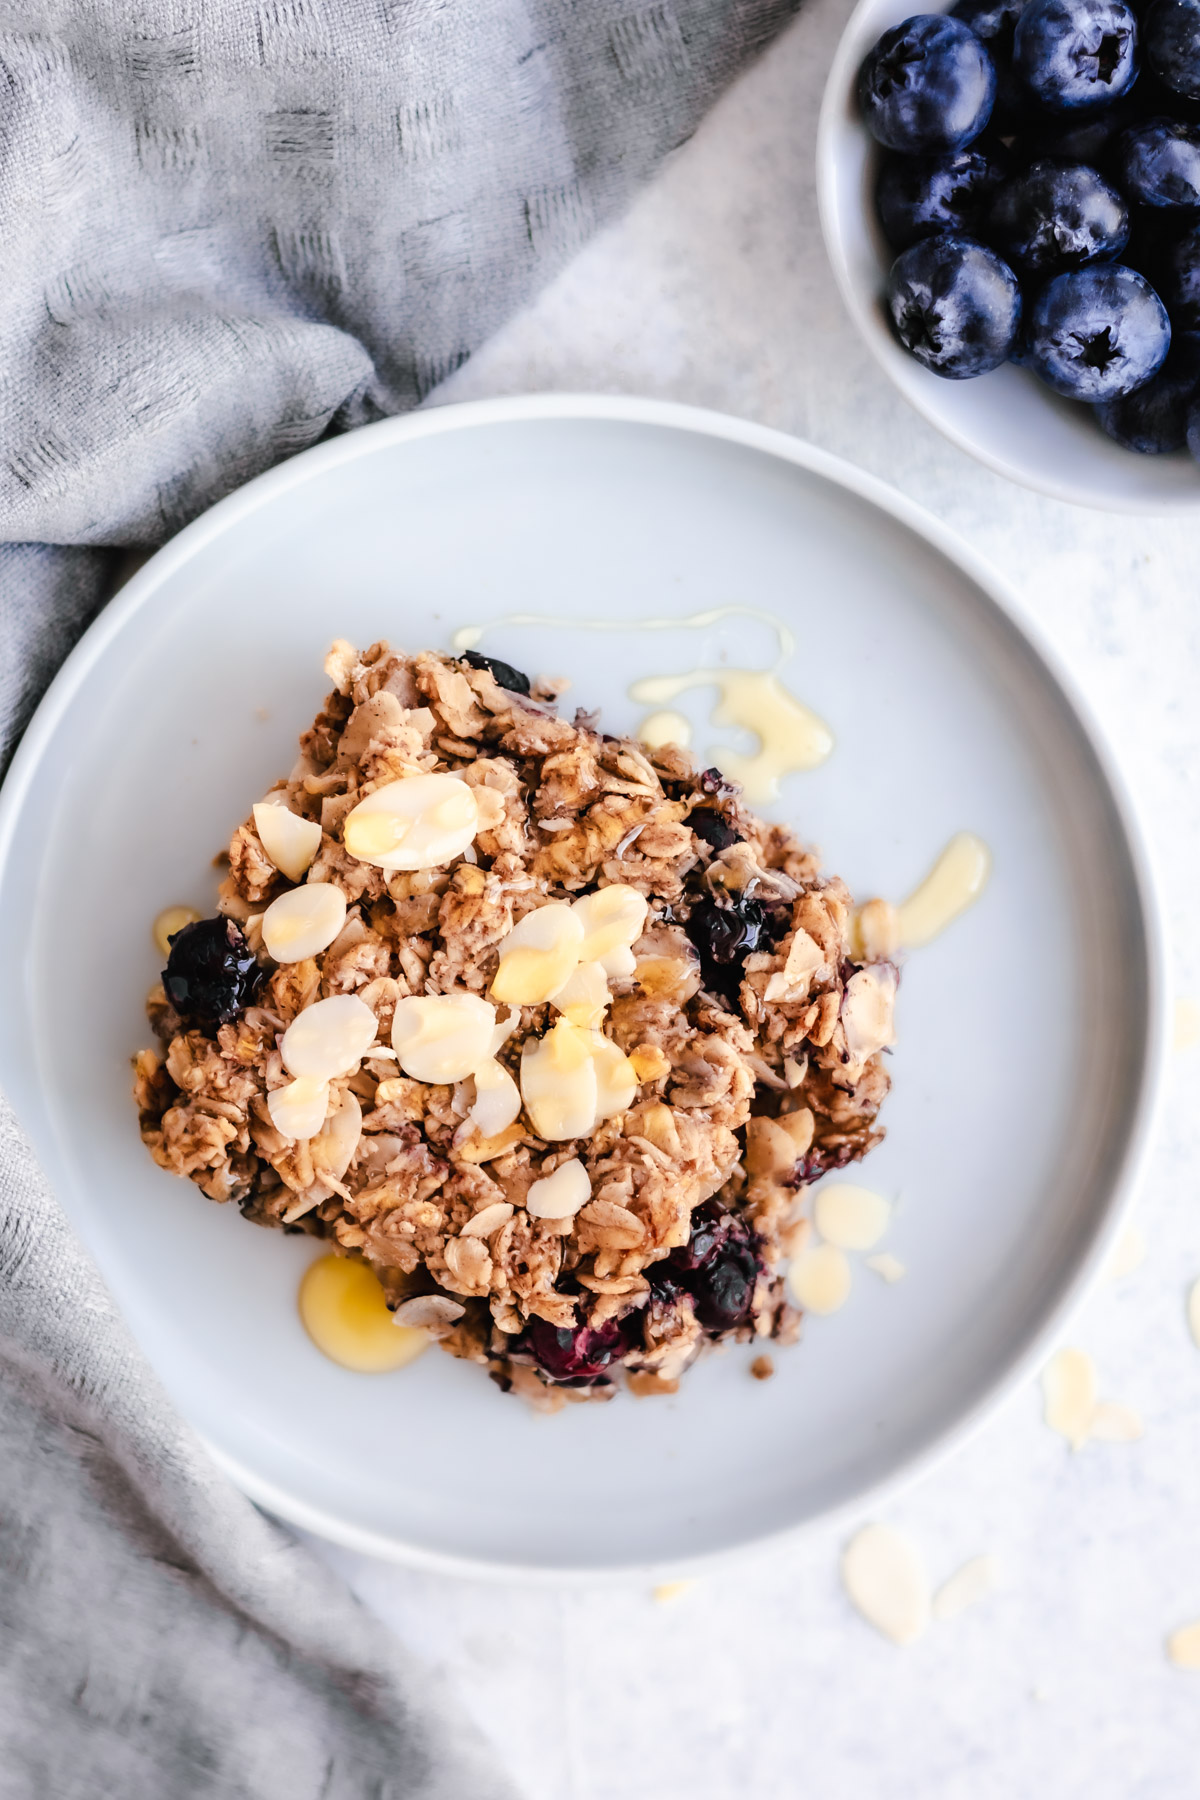 Berry Baked Oatmeal Recipe